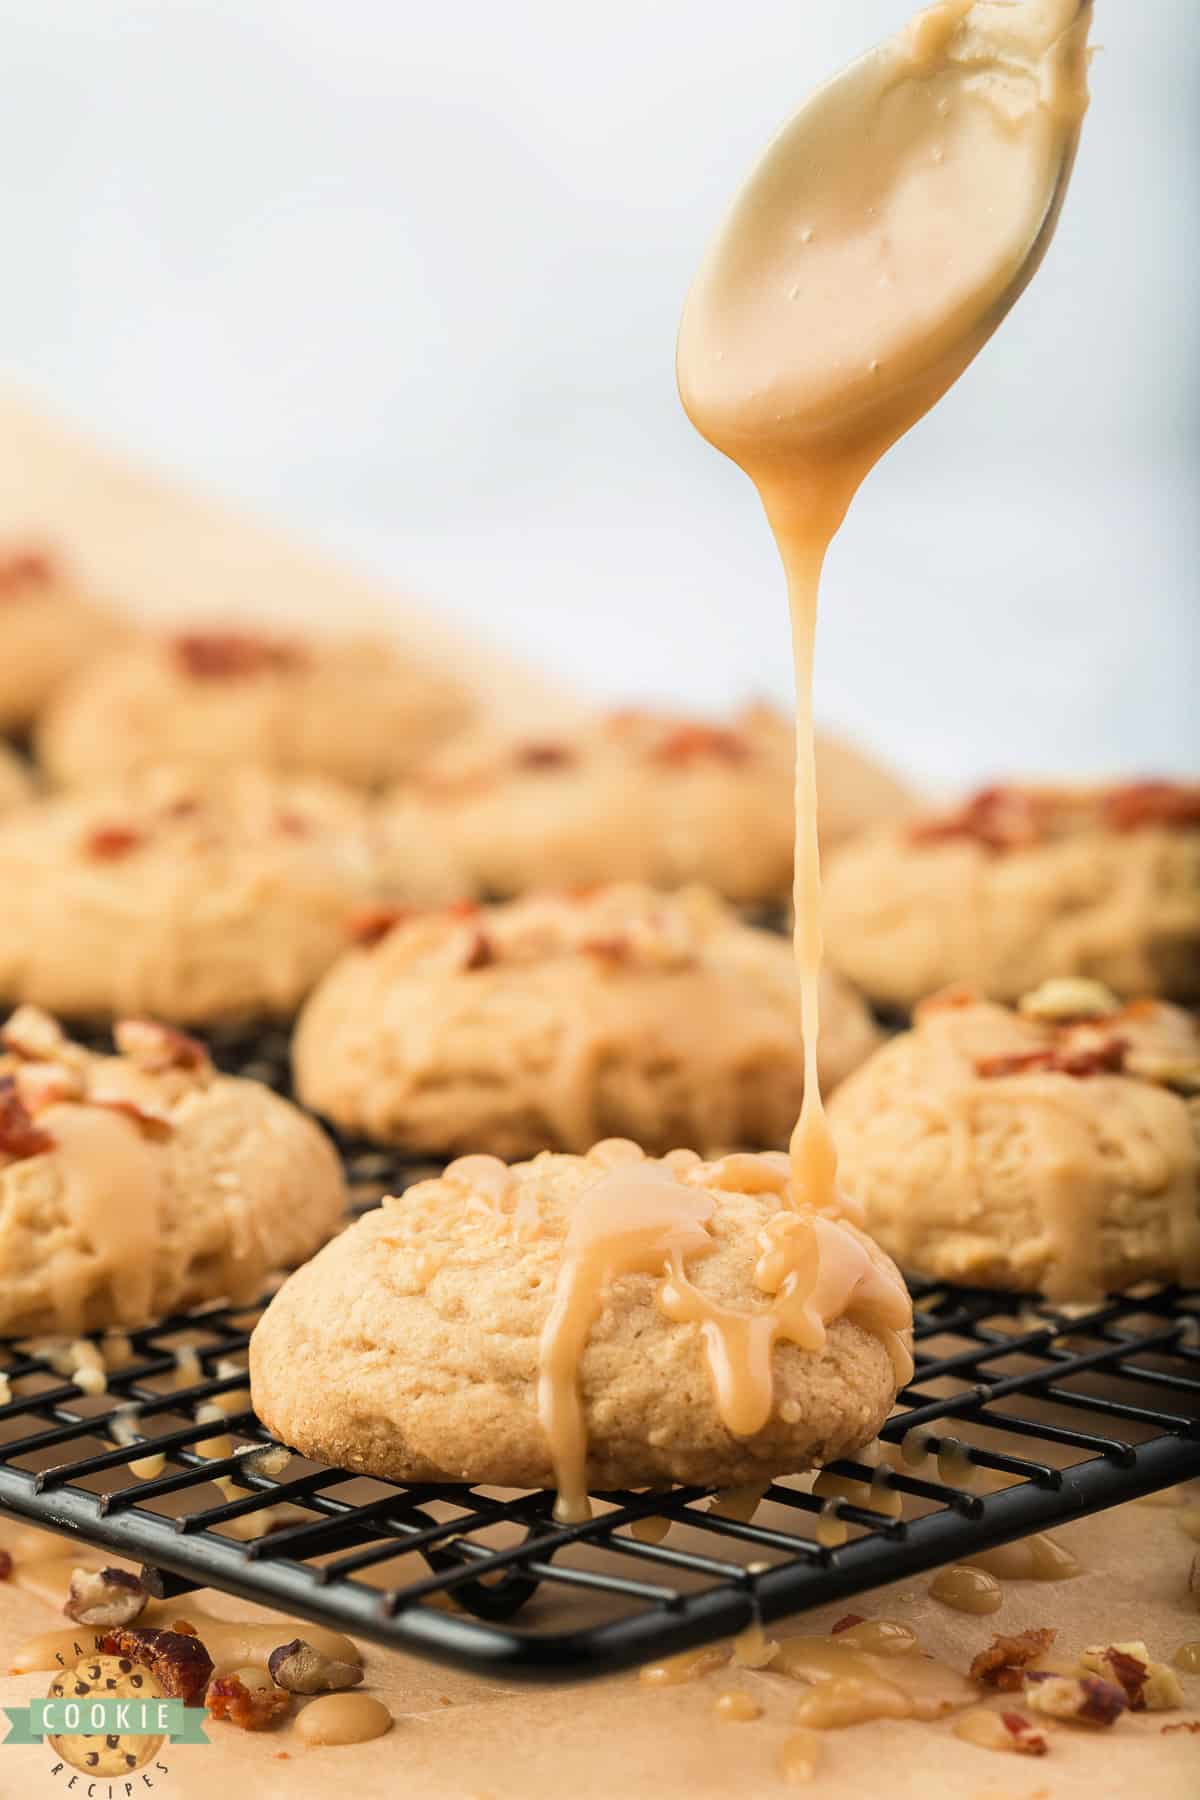 Drizzling maple glaze on top of baked cookies.